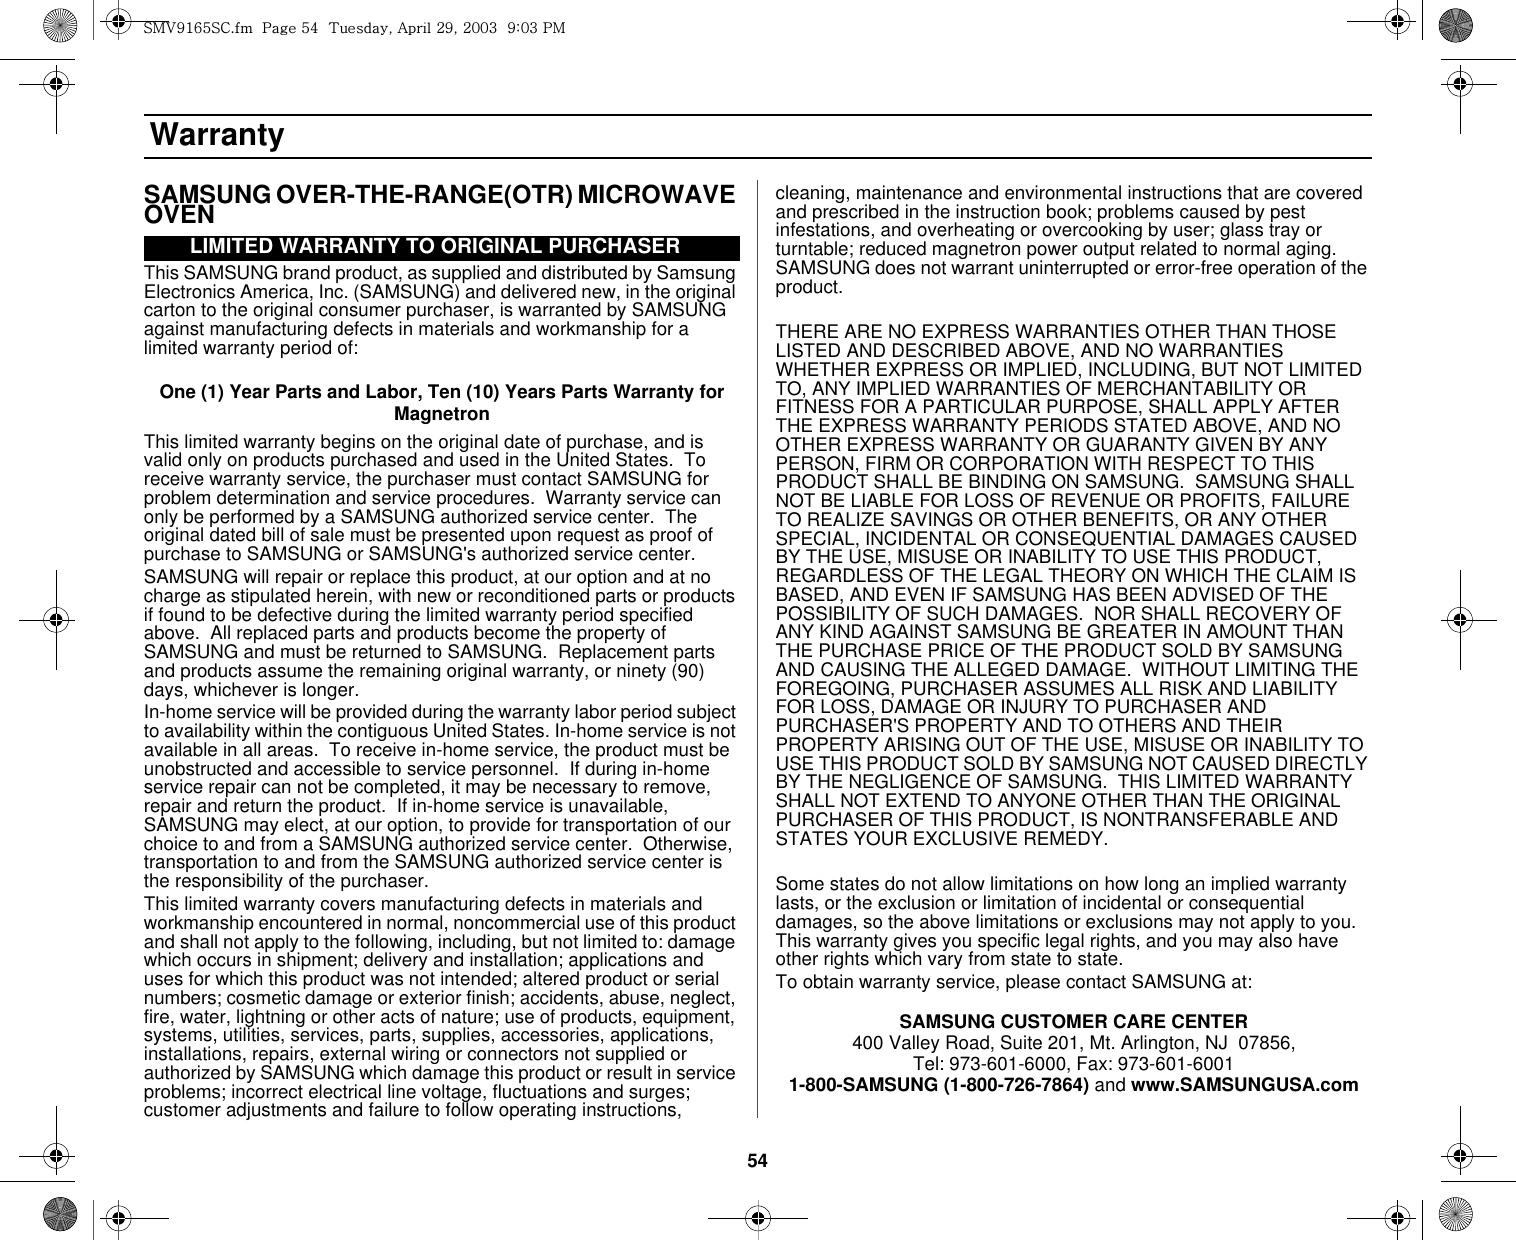 54 WarrantySAMSUNG OVER-THE-RANGE(OTR) MICROWAVE OVENThis SAMSUNG brand product, as supplied and distributed by Samsung Electronics America, Inc. (SAMSUNG) and delivered new, in the original carton to the original consumer purchaser, is warranted by SAMSUNG against manufacturing defects in materials and workmanship for a limited warranty period of:One (1) Year Parts and Labor, Ten (10) Years Parts Warranty for MagnetronThis limited warranty begins on the original date of purchase, and is valid only on products purchased and used in the United States.  To receive warranty service, the purchaser must contact SAMSUNG for problem determination and service procedures.  Warranty service can only be performed by a SAMSUNG authorized service center.  The original dated bill of sale must be presented upon request as proof of purchase to SAMSUNG or SAMSUNG&apos;s authorized service center. SAMSUNG will repair or replace this product, at our option and at no charge as stipulated herein, with new or reconditioned parts or products if found to be defective during the limited warranty period specified above.  All replaced parts and products become the property of SAMSUNG and must be returned to SAMSUNG.  Replacement parts and products assume the remaining original warranty, or ninety (90) days, whichever is longer.In-home service will be provided during the warranty labor period subject to availability within the contiguous United States. In-home service is not available in all areas.  To receive in-home service, the product must be unobstructed and accessible to service personnel.  If during in-home service repair can not be completed, it may be necessary to remove, repair and return the product.  If in-home service is unavailable, SAMSUNG may elect, at our option, to provide for transportation of our choice to and from a SAMSUNG authorized service center.  Otherwise, transportation to and from the SAMSUNG authorized service center is the responsibility of the purchaser.This limited warranty covers manufacturing defects in materials and workmanship encountered in normal, noncommercial use of this product and shall not apply to the following, including, but not limited to: damage which occurs in shipment; delivery and installation; applications and uses for which this product was not intended; altered product or serial numbers; cosmetic damage or exterior finish; accidents, abuse, neglect, fire, water, lightning or other acts of nature; use of products, equipment, systems, utilities, services, parts, supplies, accessories, applications, installations, repairs, external wiring or connectors not supplied or authorized by SAMSUNG which damage this product or result in service problems; incorrect electrical line voltage, fluctuations and surges; customer adjustments and failure to follow operating instructions, cleaning, maintenance and environmental instructions that are covered and prescribed in the instruction book; problems caused by pest infestations, and overheating or overcooking by user; glass tray or turntable; reduced magnetron power output related to normal aging. SAMSUNG does not warrant uninterrupted or error-free operation of the product.THERE ARE NO EXPRESS WARRANTIES OTHER THAN THOSE LISTED AND DESCRIBED ABOVE, AND NO WARRANTIES WHETHER EXPRESS OR IMPLIED, INCLUDING, BUT NOT LIMITED TO, ANY IMPLIED WARRANTIES OF MERCHANTABILITY OR FITNESS FOR A PARTICULAR PURPOSE, SHALL APPLY AFTER THE EXPRESS WARRANTY PERIODS STATED ABOVE, AND NO OTHER EXPRESS WARRANTY OR GUARANTY GIVEN BY ANY PERSON, FIRM OR CORPORATION WITH RESPECT TO THIS PRODUCT SHALL BE BINDING ON SAMSUNG.  SAMSUNG SHALL NOT BE LIABLE FOR LOSS OF REVENUE OR PROFITS, FAILURE TO REALIZE SAVINGS OR OTHER BENEFITS, OR ANY OTHER SPECIAL, INCIDENTAL OR CONSEQUENTIAL DAMAGES CAUSED BY THE USE, MISUSE OR INABILITY TO USE THIS PRODUCT, REGARDLESS OF THE LEGAL THEORY ON WHICH THE CLAIM IS BASED, AND EVEN IF SAMSUNG HAS BEEN ADVISED OF THE POSSIBILITY OF SUCH DAMAGES.  NOR SHALL RECOVERY OF ANY KIND AGAINST SAMSUNG BE GREATER IN AMOUNT THAN THE PURCHASE PRICE OF THE PRODUCT SOLD BY SAMSUNG AND CAUSING THE ALLEGED DAMAGE.  WITHOUT LIMITING THE FOREGOING, PURCHASER ASSUMES ALL RISK AND LIABILITY FOR LOSS, DAMAGE OR INJURY TO PURCHASER AND PURCHASER&apos;S PROPERTY AND TO OTHERS AND THEIR PROPERTY ARISING OUT OF THE USE, MISUSE OR INABILITY TO USE THIS PRODUCT SOLD BY SAMSUNG NOT CAUSED DIRECTLY BY THE NEGLIGENCE OF SAMSUNG.  THIS LIMITED WARRANTY SHALL NOT EXTEND TO ANYONE OTHER THAN THE ORIGINAL PURCHASER OF THIS PRODUCT, IS NONTRANSFERABLE AND STATES YOUR EXCLUSIVE REMEDY.Some states do not allow limitations on how long an implied warranty lasts, or the exclusion or limitation of incidental or consequential damages, so the above limitations or exclusions may not apply to you.  This warranty gives you specific legal rights, and you may also have other rights which vary from state to state.To obtain warranty service, please contact SAMSUNG at:SAMSUNG CUSTOMER CARE CENTER400 Valley Road, Suite 201, Mt. Arlington, NJ  07856, Tel: 973-601-6000, Fax: 973-601-60011-800-SAMSUNG (1-800-726-7864) and www.SAMSUNGUSA.comLIMITED WARRANTY TO ORIGINAL PURCHASERzt}`X]\zjUGGwG\[GG{SGhGY`SGYWWZGG`aWZGwt